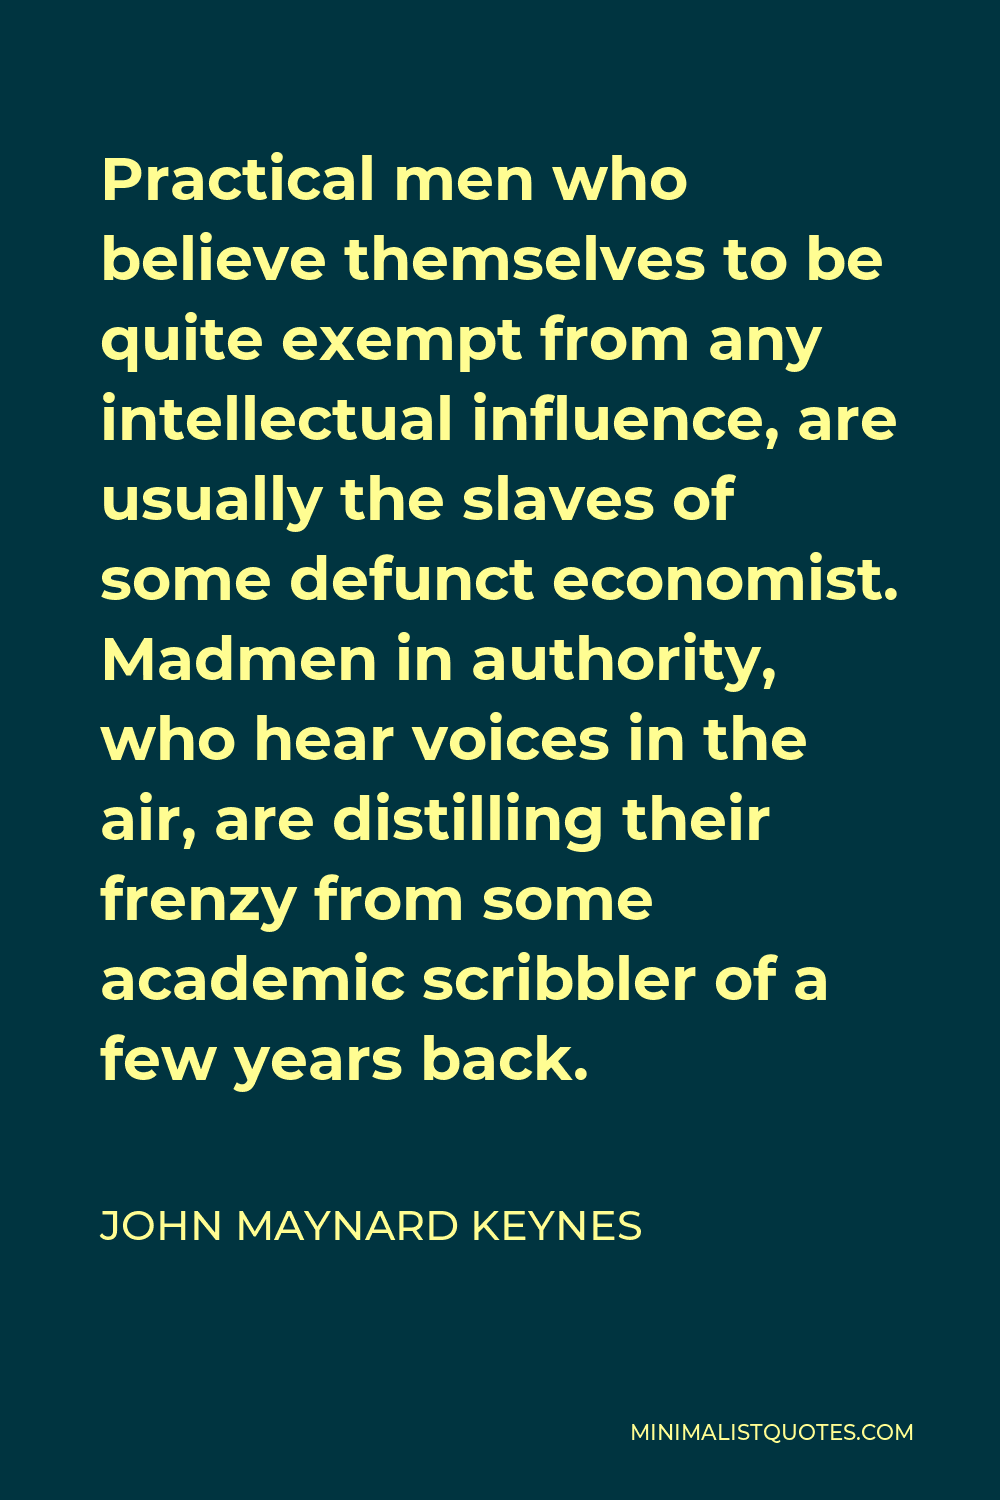 John Maynard Keynes Quote - Practical men who believe themselves to be quite exempt from any intellectual influence, are usually the slaves of some defunct economist. Madmen in authority, who hear voices in the air, are distilling their frenzy from some academic scribbler of a few years back.